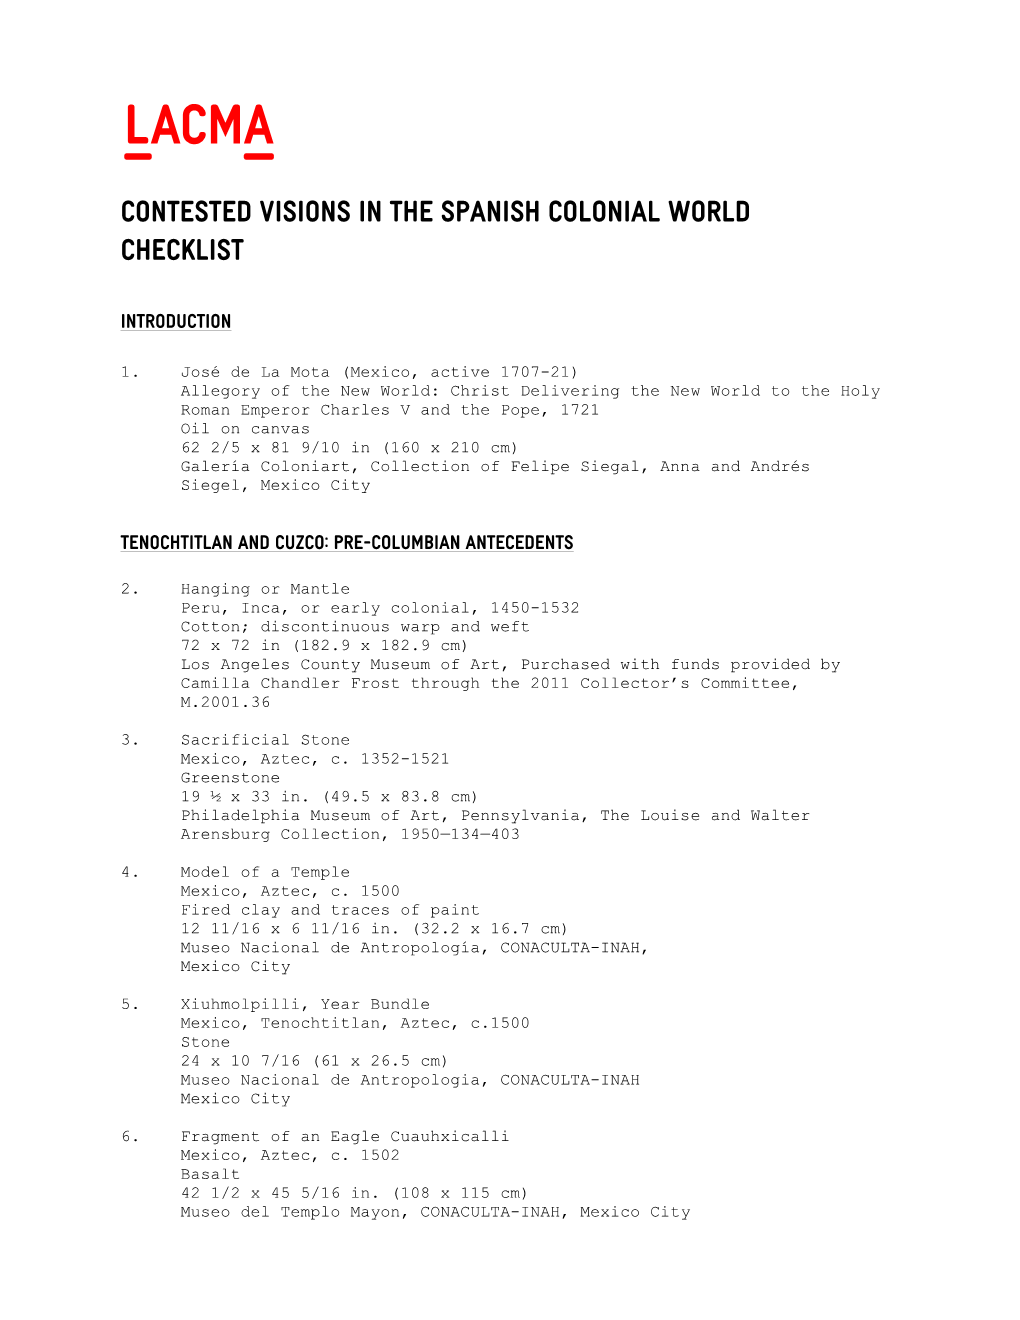 Contested Visions in the Spanish Colonial World Checklist